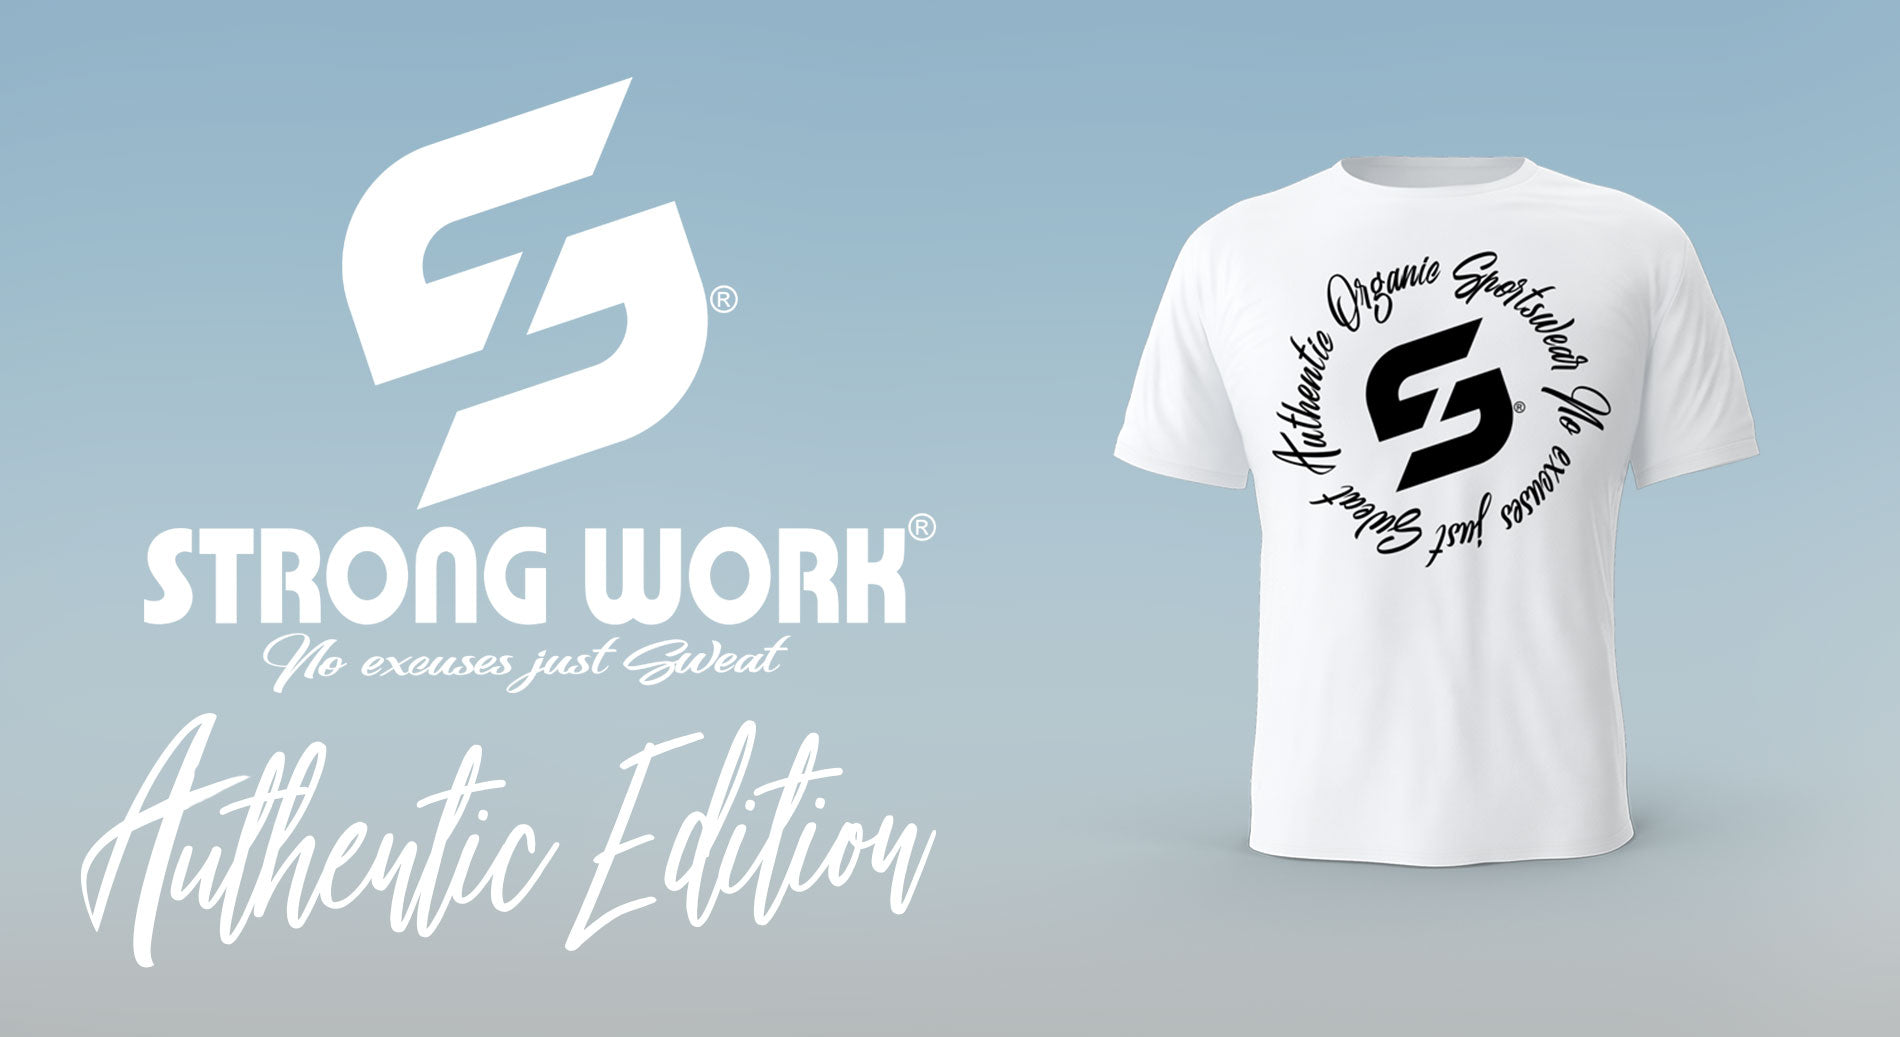 STRONG WORK SPORTSWEAR - AUTHENTIC T-SHIRT FOR WOMEN - SUSTAINABLE AND ORGANIC SPORTSWEAR